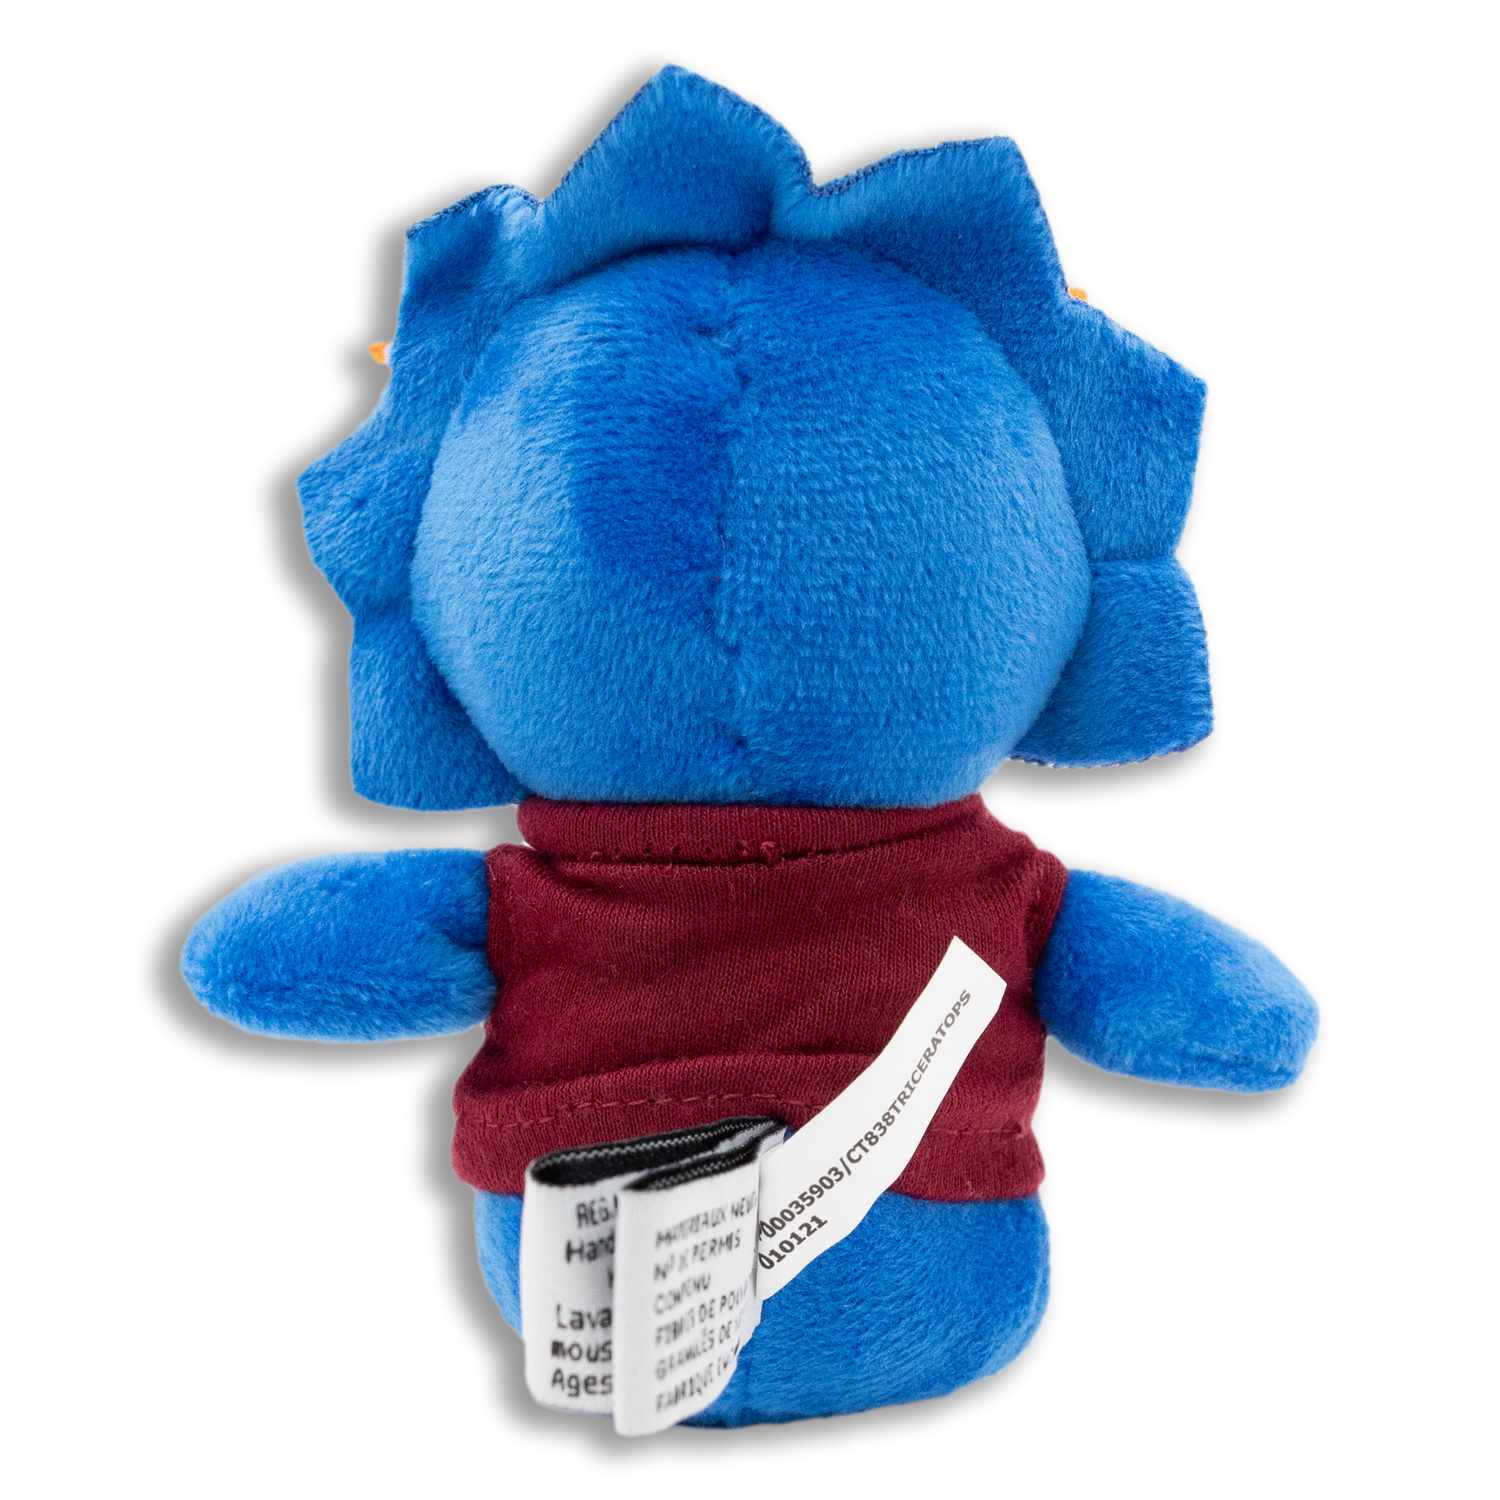 Texas A&M University Blue Triceratops Shorties Plush Toy